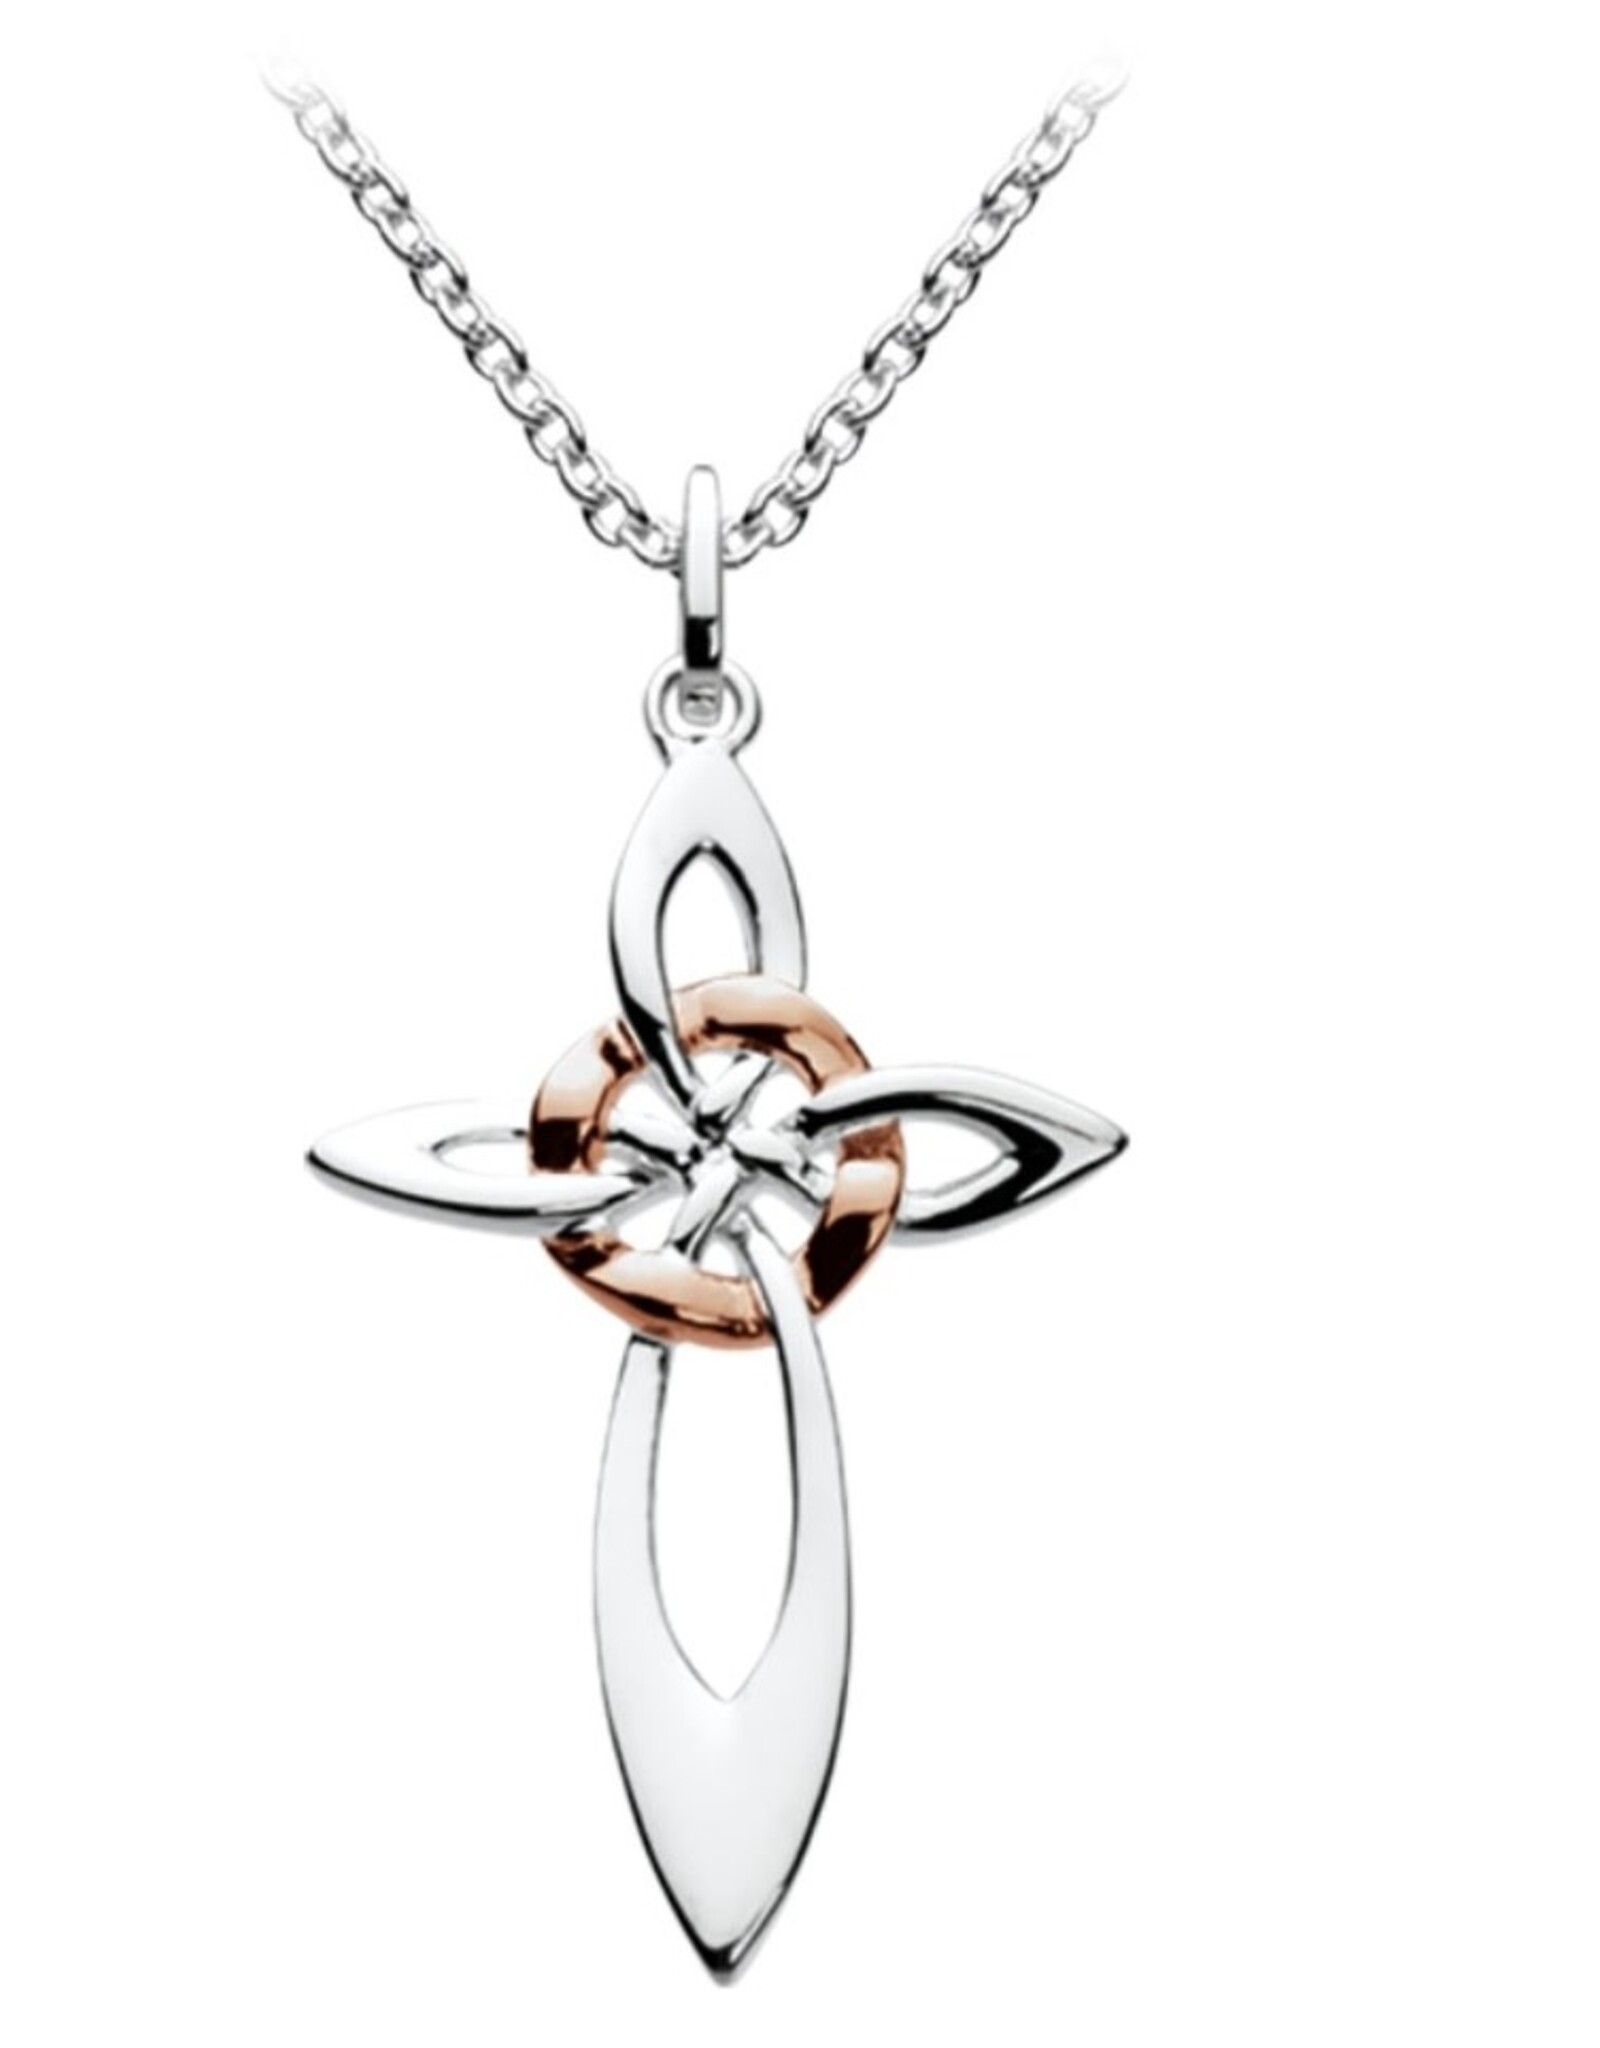 Kit Heath CELTIC CROSS AND RING NECKLACE - rose gold plating